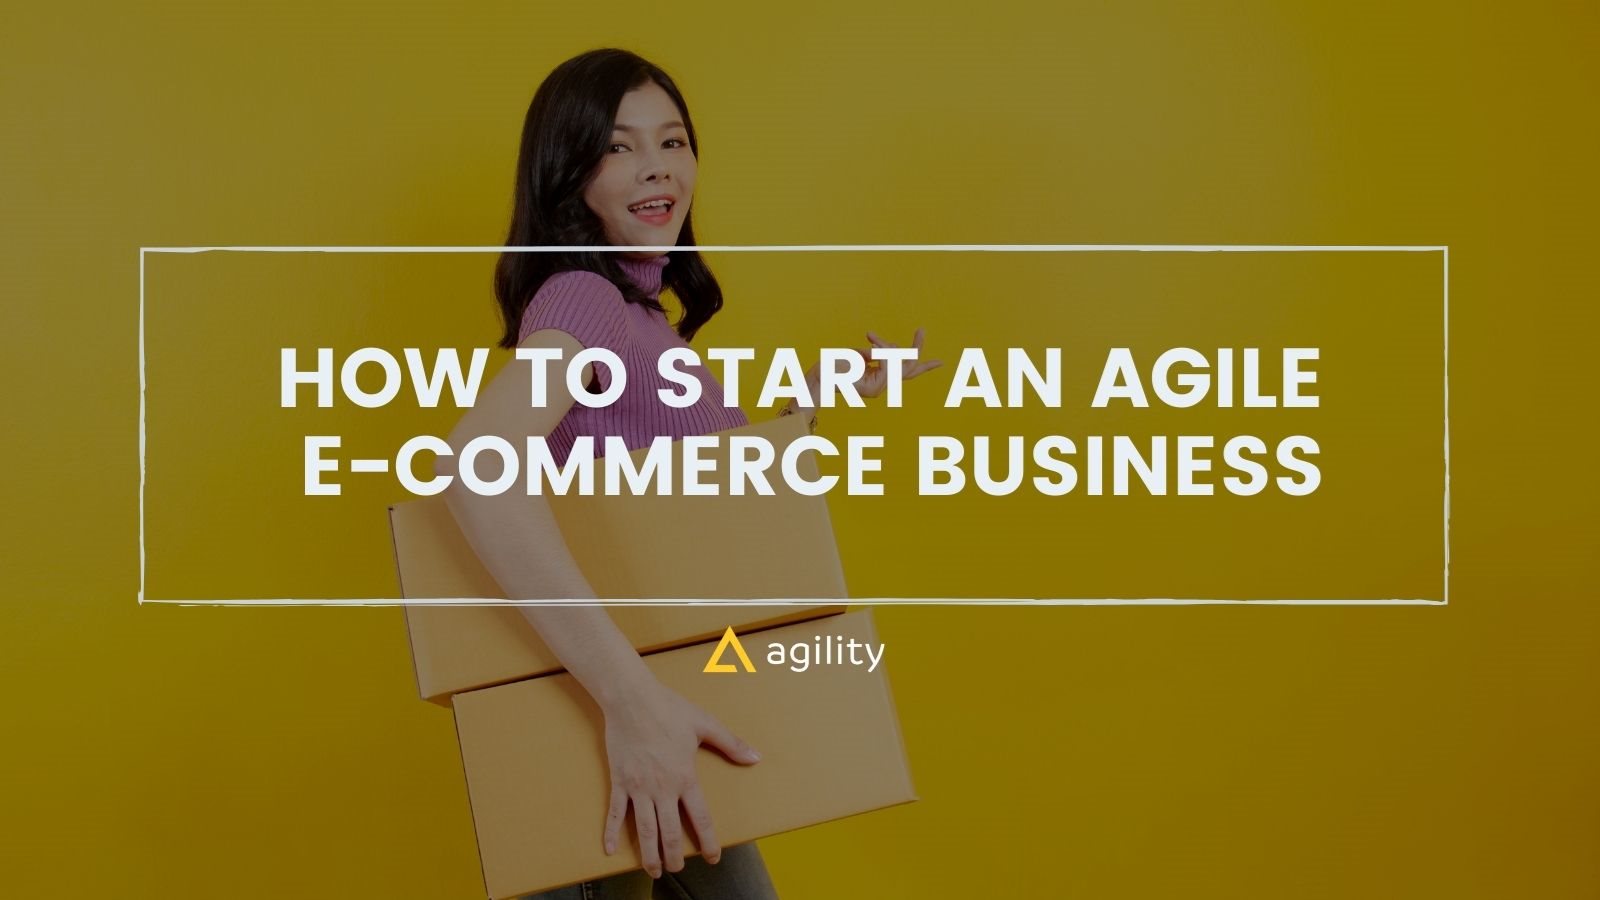 How to Start an Agile E-commerce Business with Agility CMS